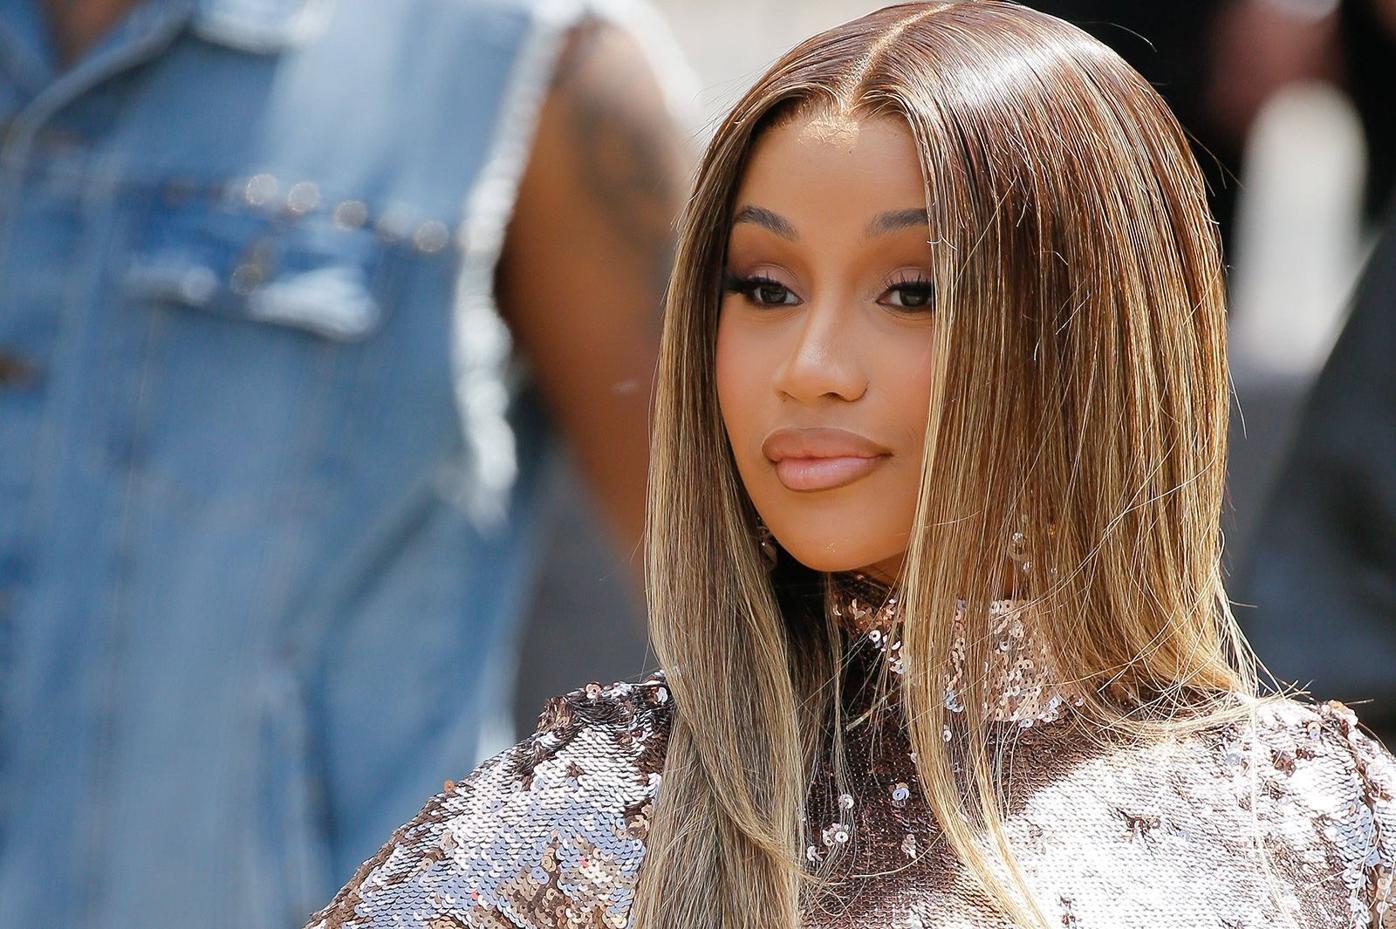 Cardi B's Latest Printed Hair Is Truly Next Level